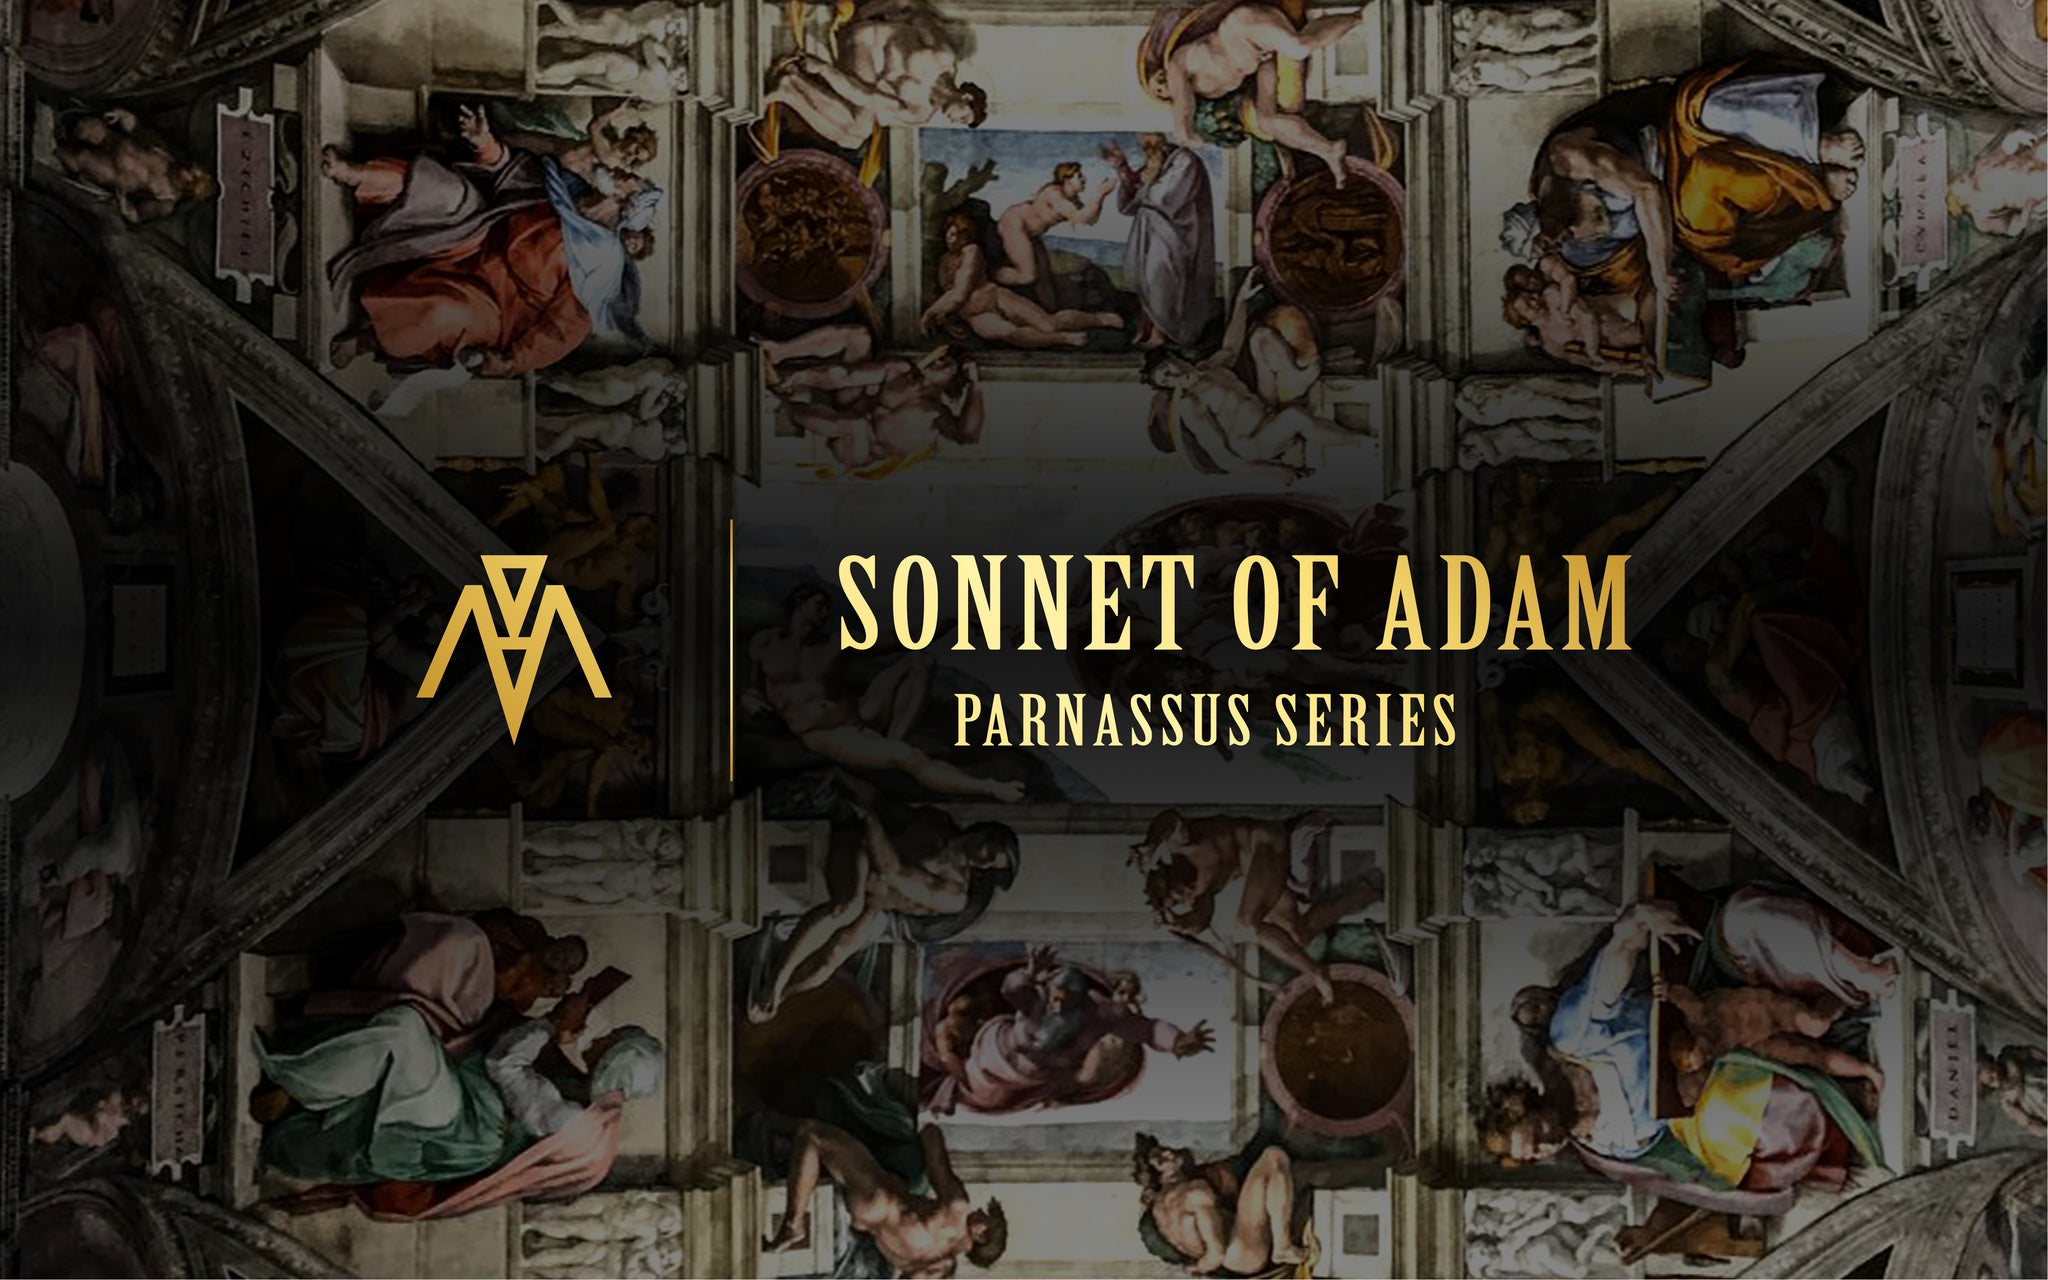 The Golden Symphony; 'Sonnet Of Adam' Is Now Available!